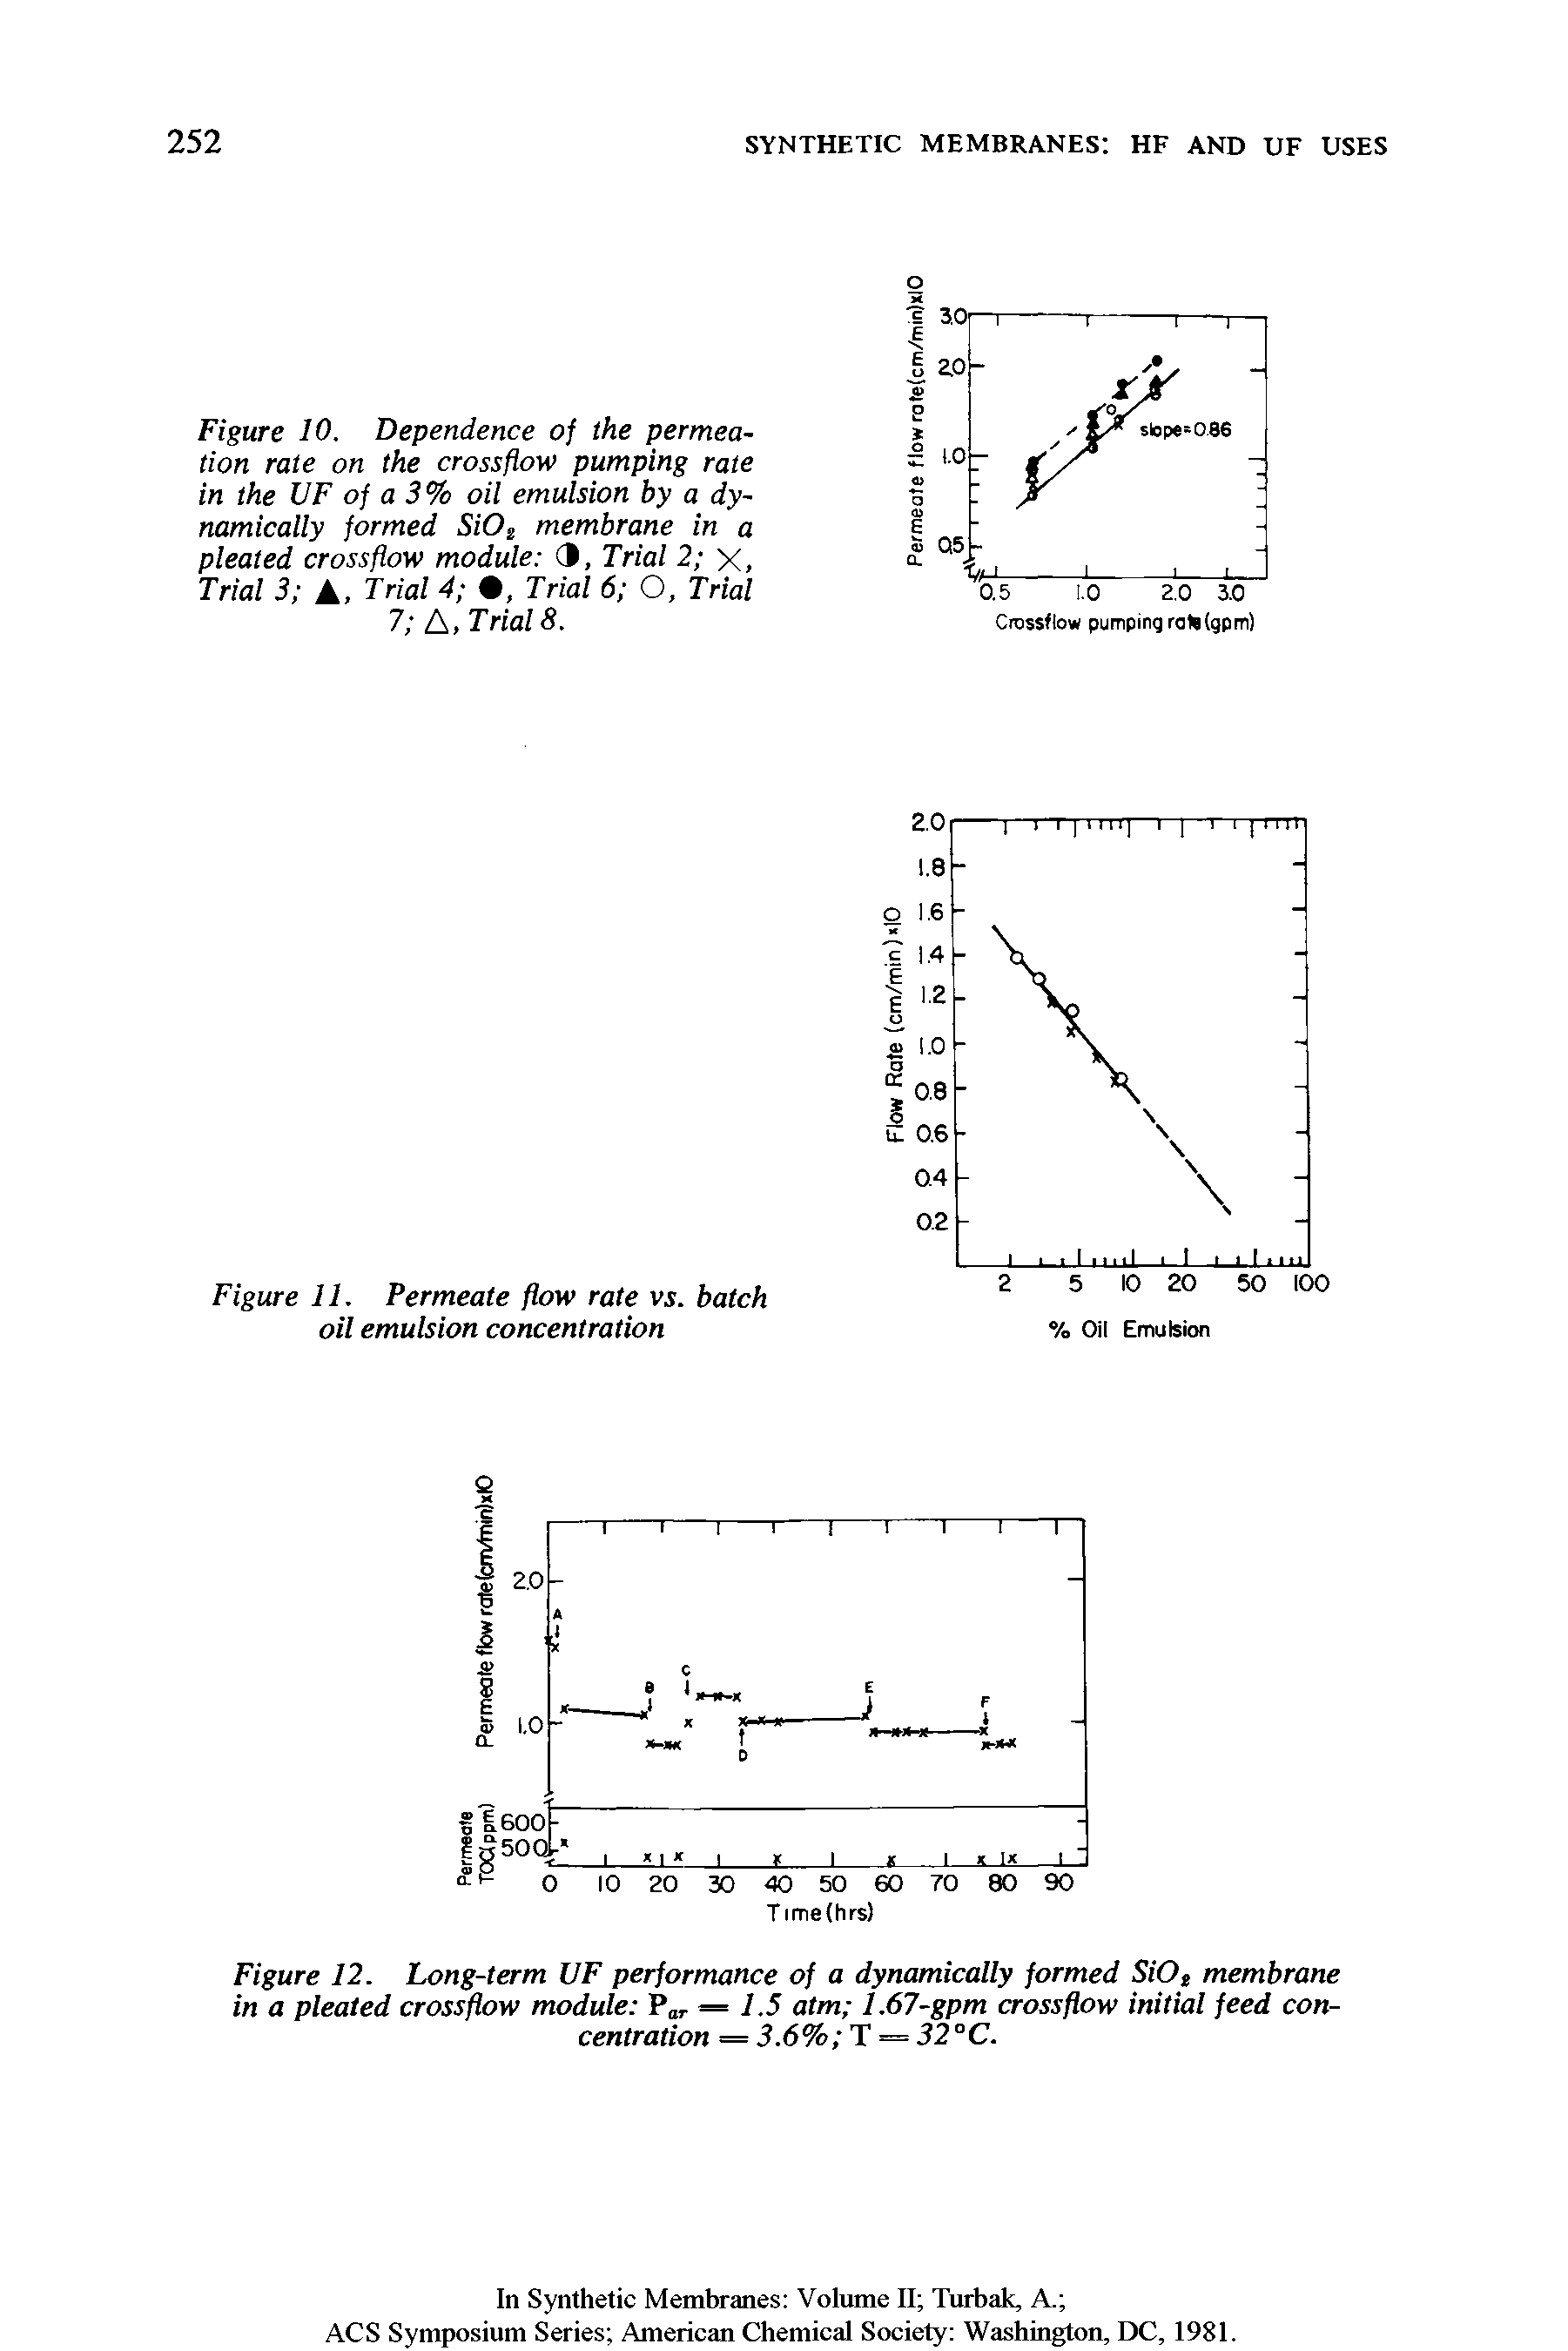 Figure 10. Dependence of the permeation rate on the crossflow pumping rate in the UF of a 3% oil emulsion by a dynamically formed 5iO membrane in a pleated crossflow module 3, Trial 2 X, Trial 3 A, Trial 4 , Trial 6 O, Trial 7 A, Trials.